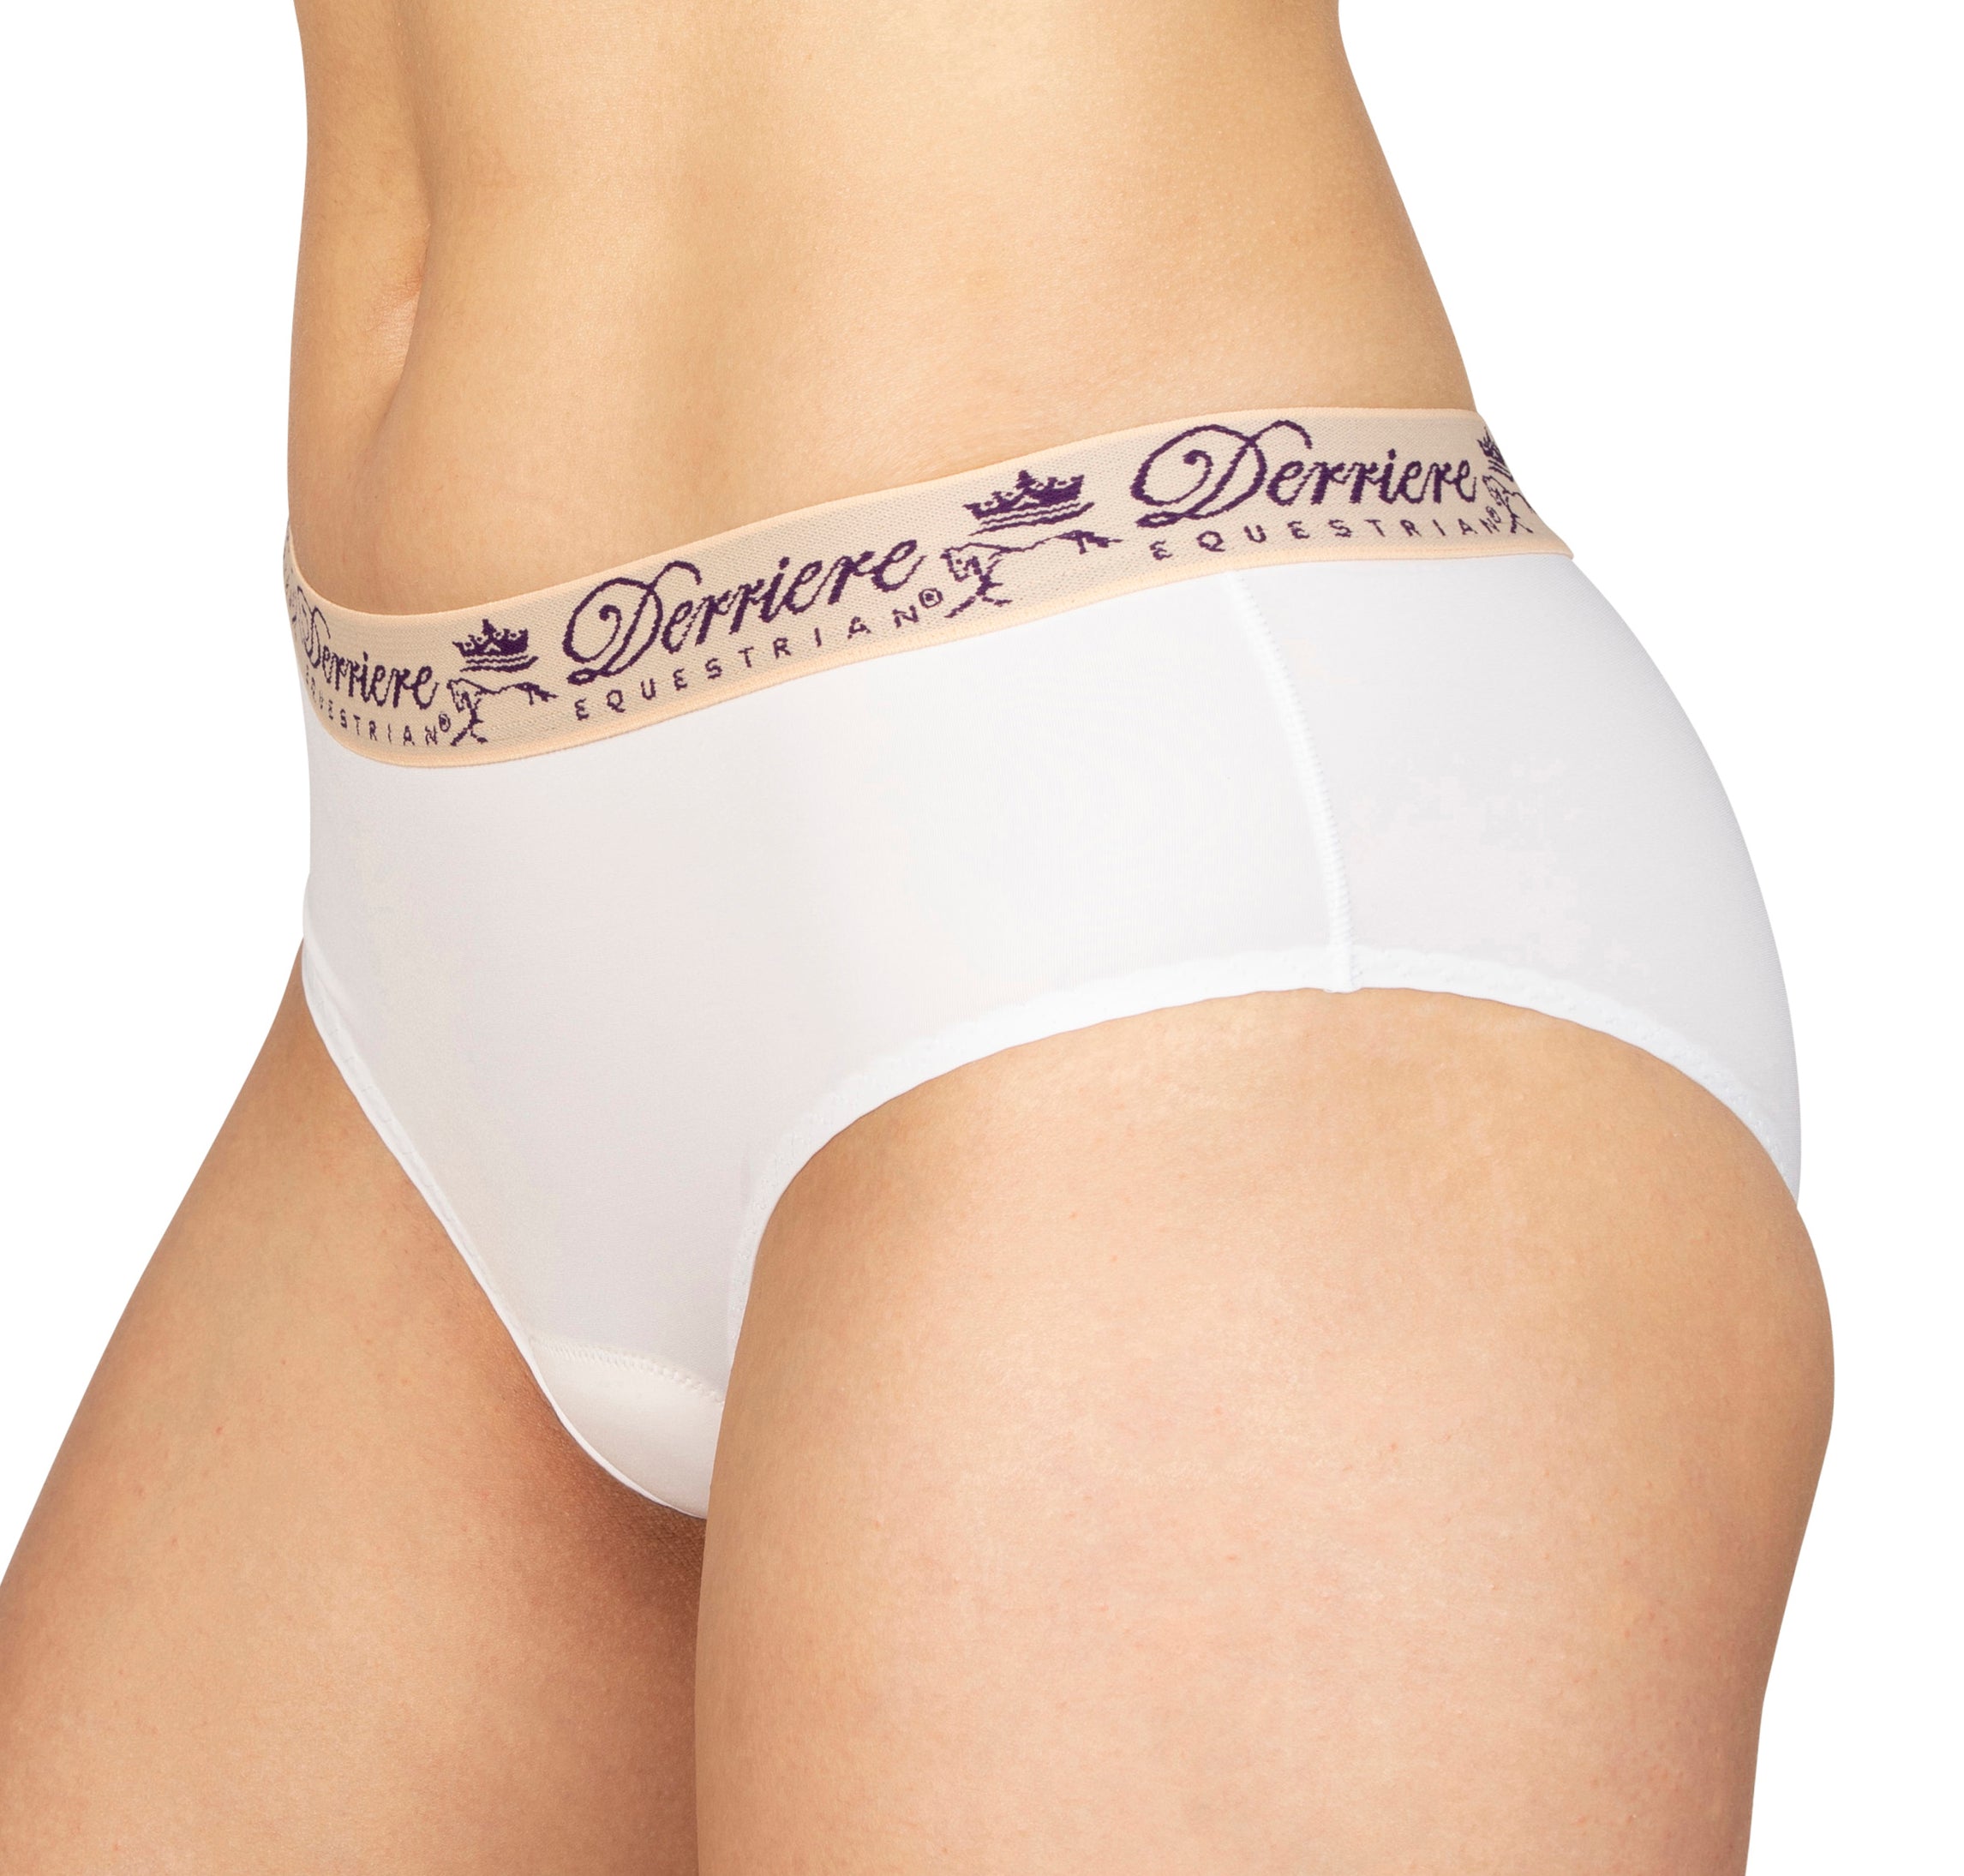 PERFORMANCE PADDED BRIEF – DERRIÈRE